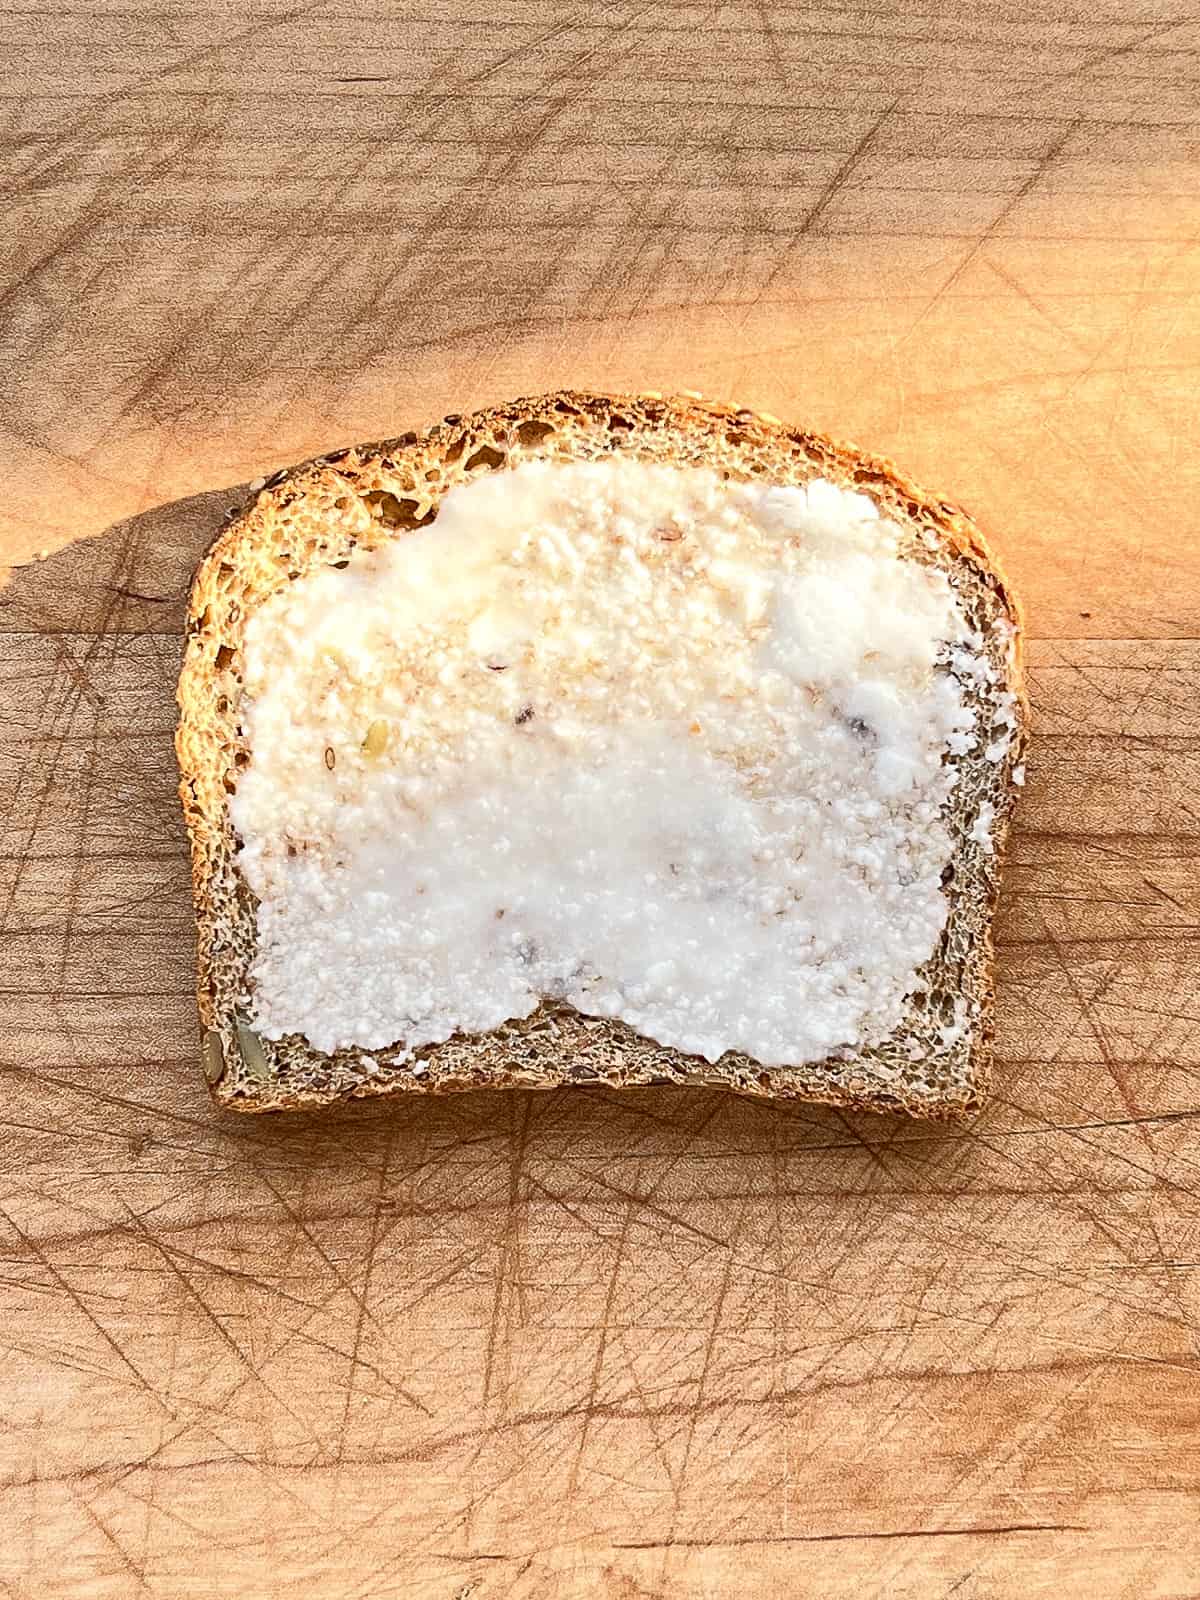 An image of coconut butter spread on toast.